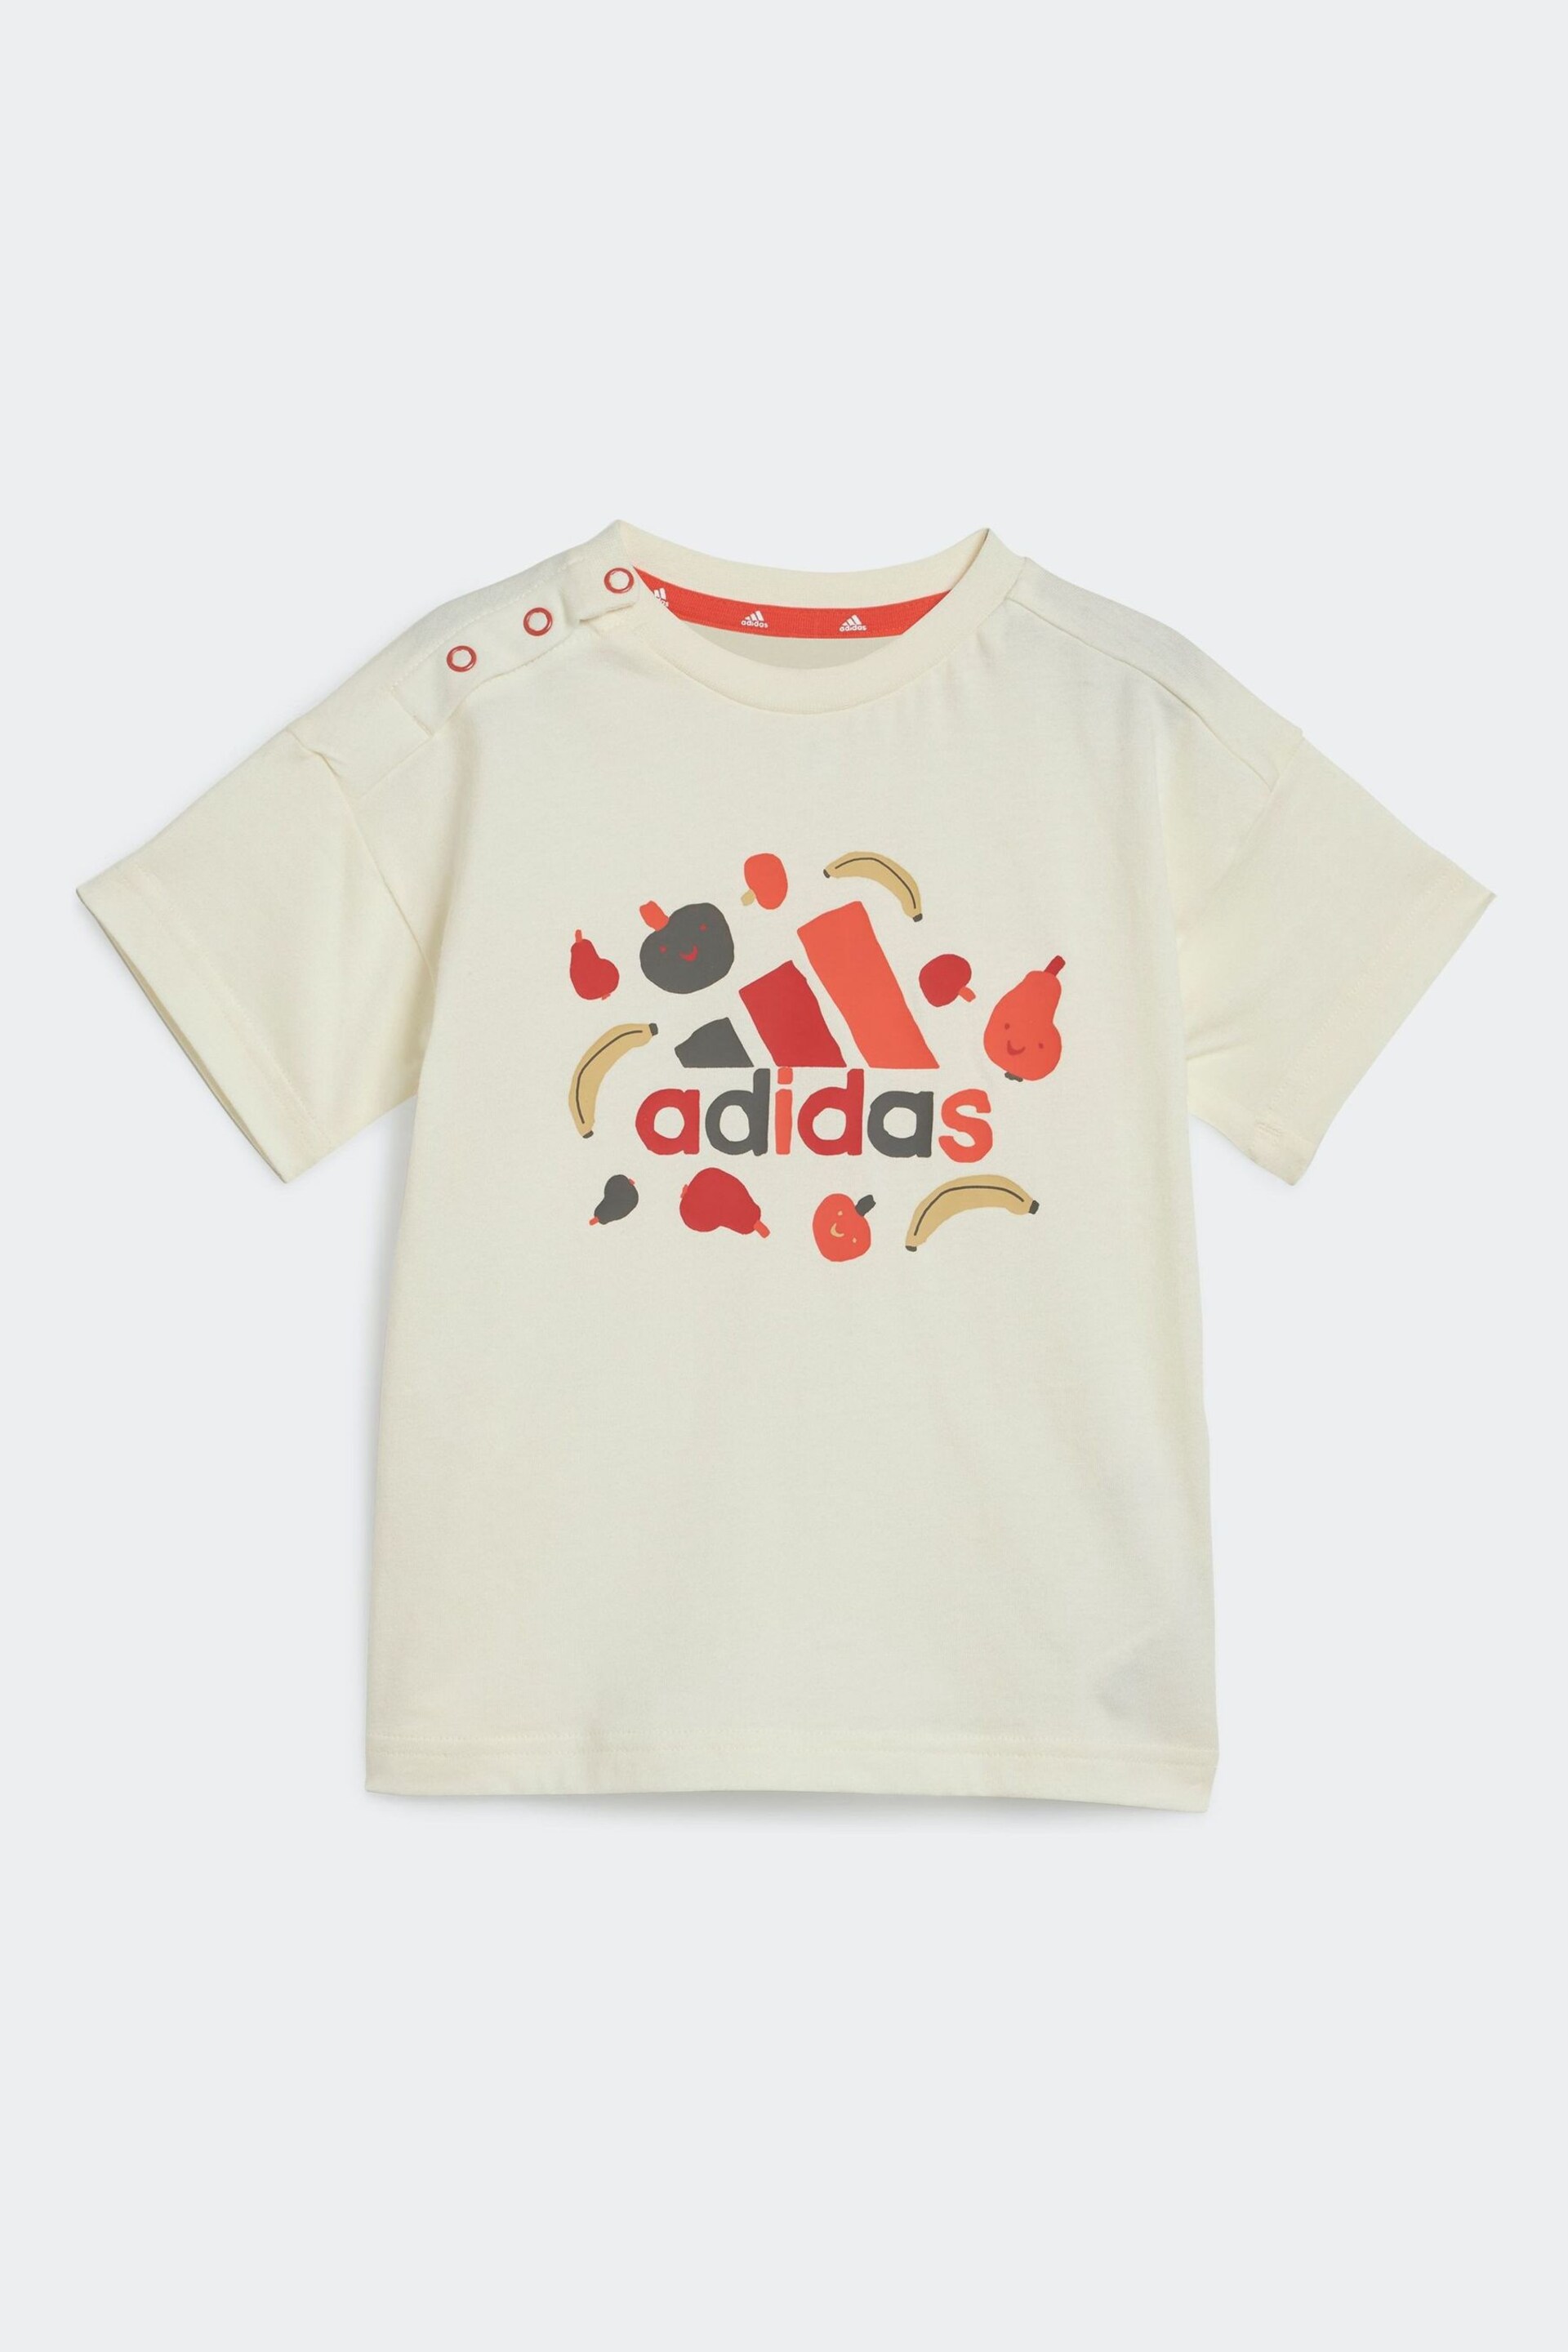 adidas Red/Cream Kids Sportswear Essentials All-Over Print T-Shirts Set - Image 2 of 6